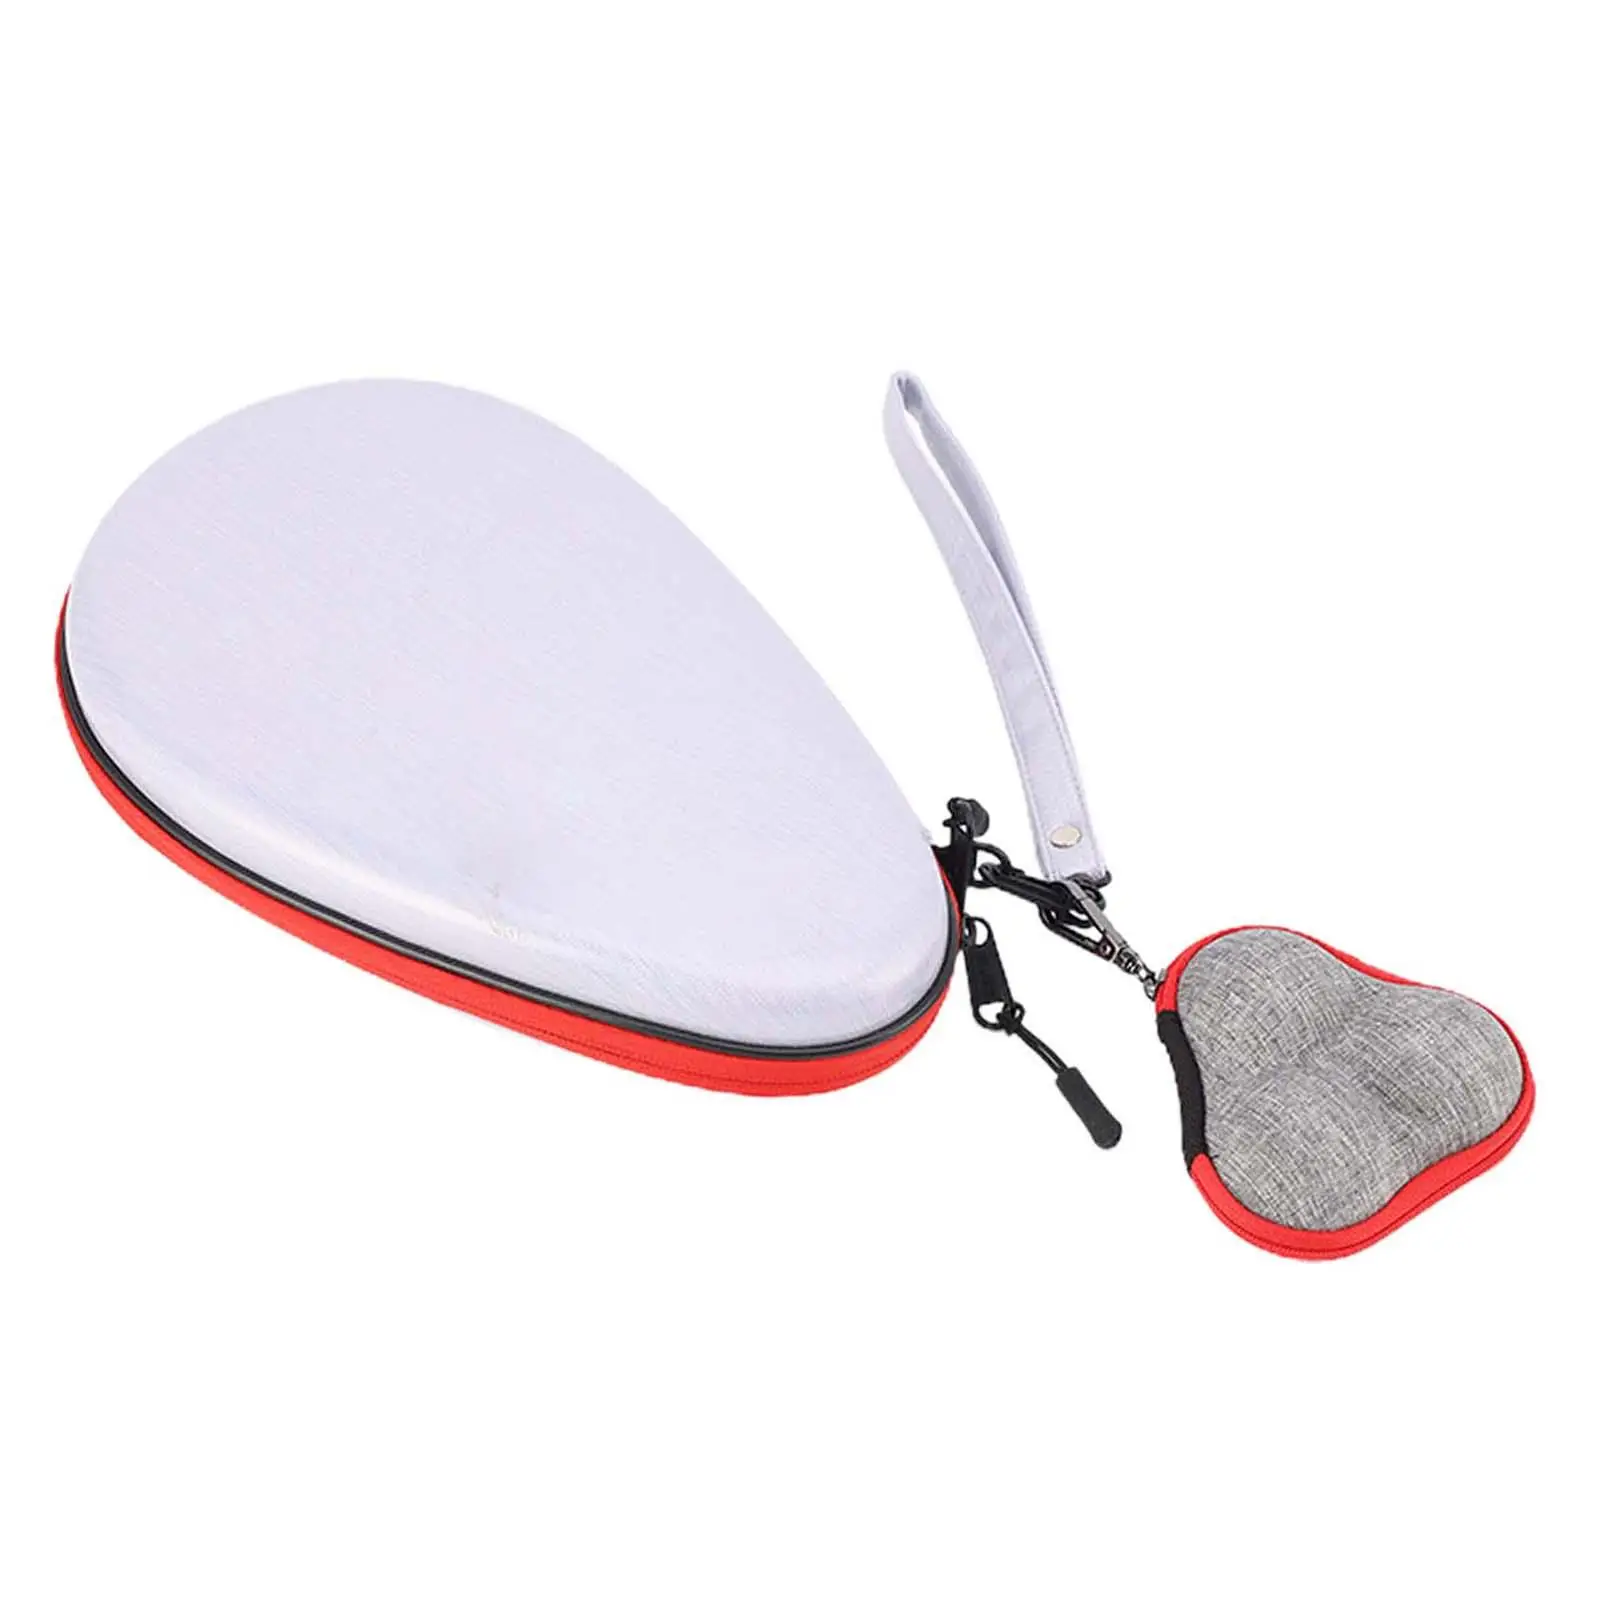 Pingpong Paddle Case Soft Wear Resistant with Zipper Hard Gourd with Ball Bag Protector for Sportsman Unisex Athlete Adult Home